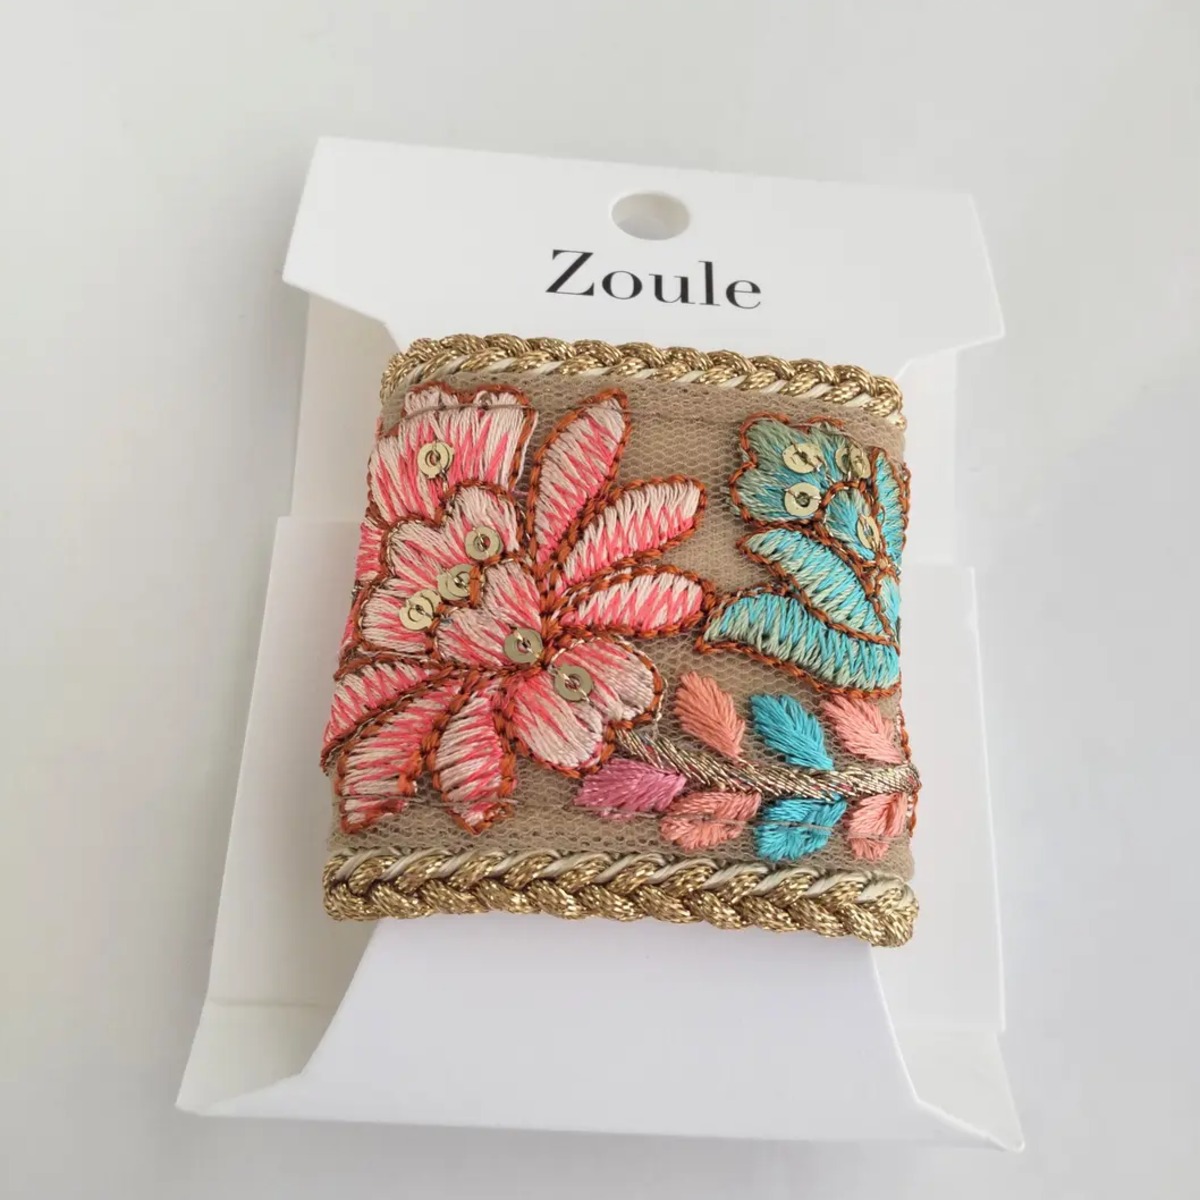 Zoule embroidery cuff30 ヘアーカフス ヘアアクセサリー ピンク